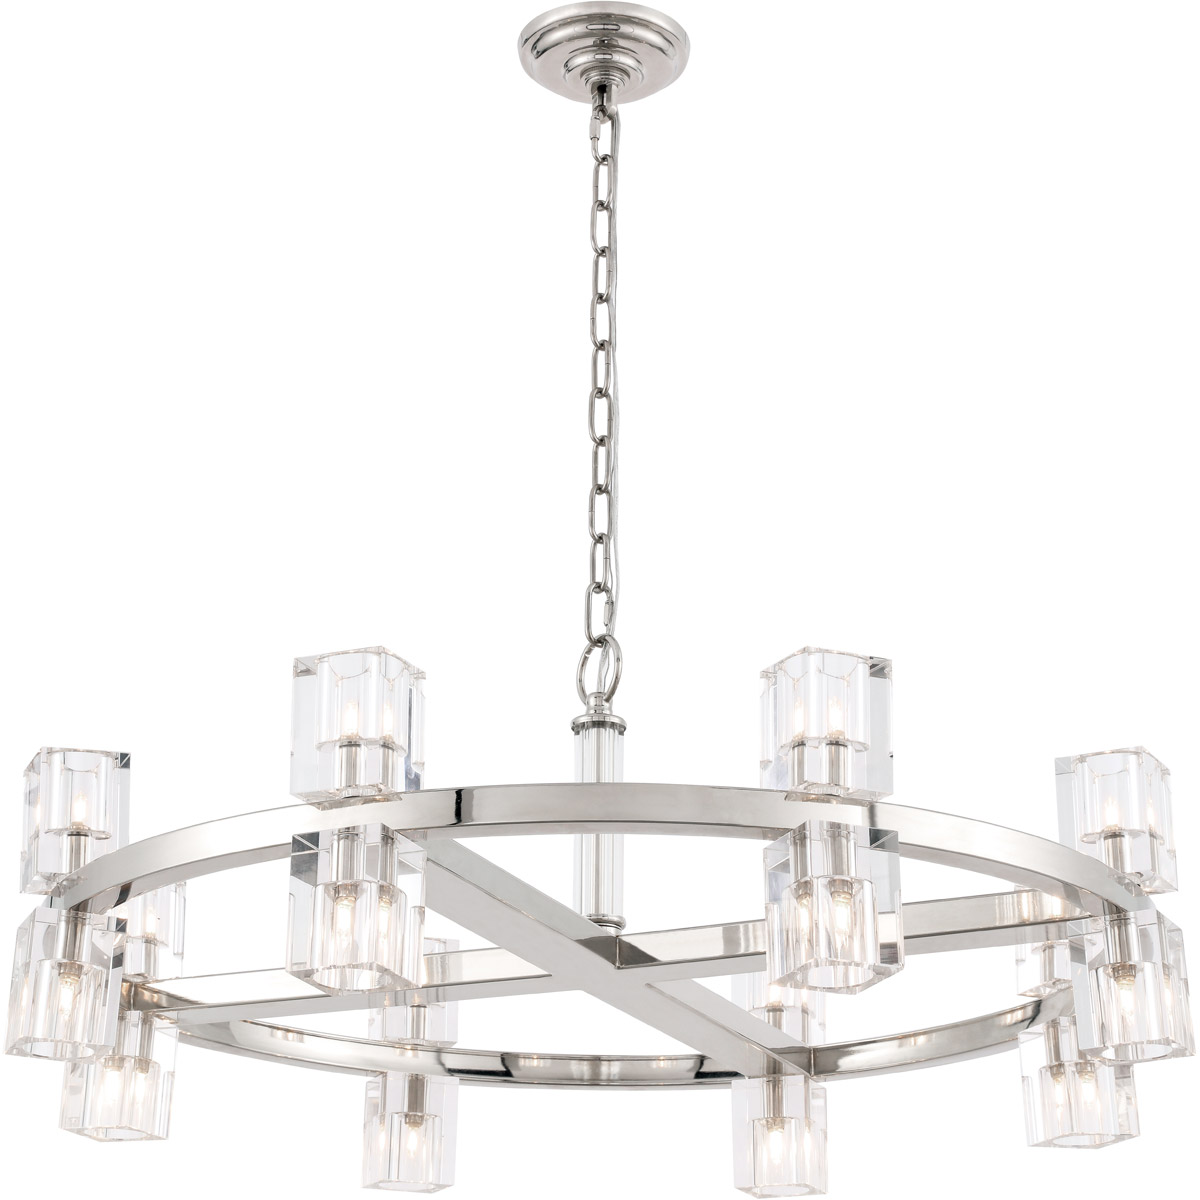 1550d32pn Chateau 16 Light Polished Nickel Ceiling Pendant